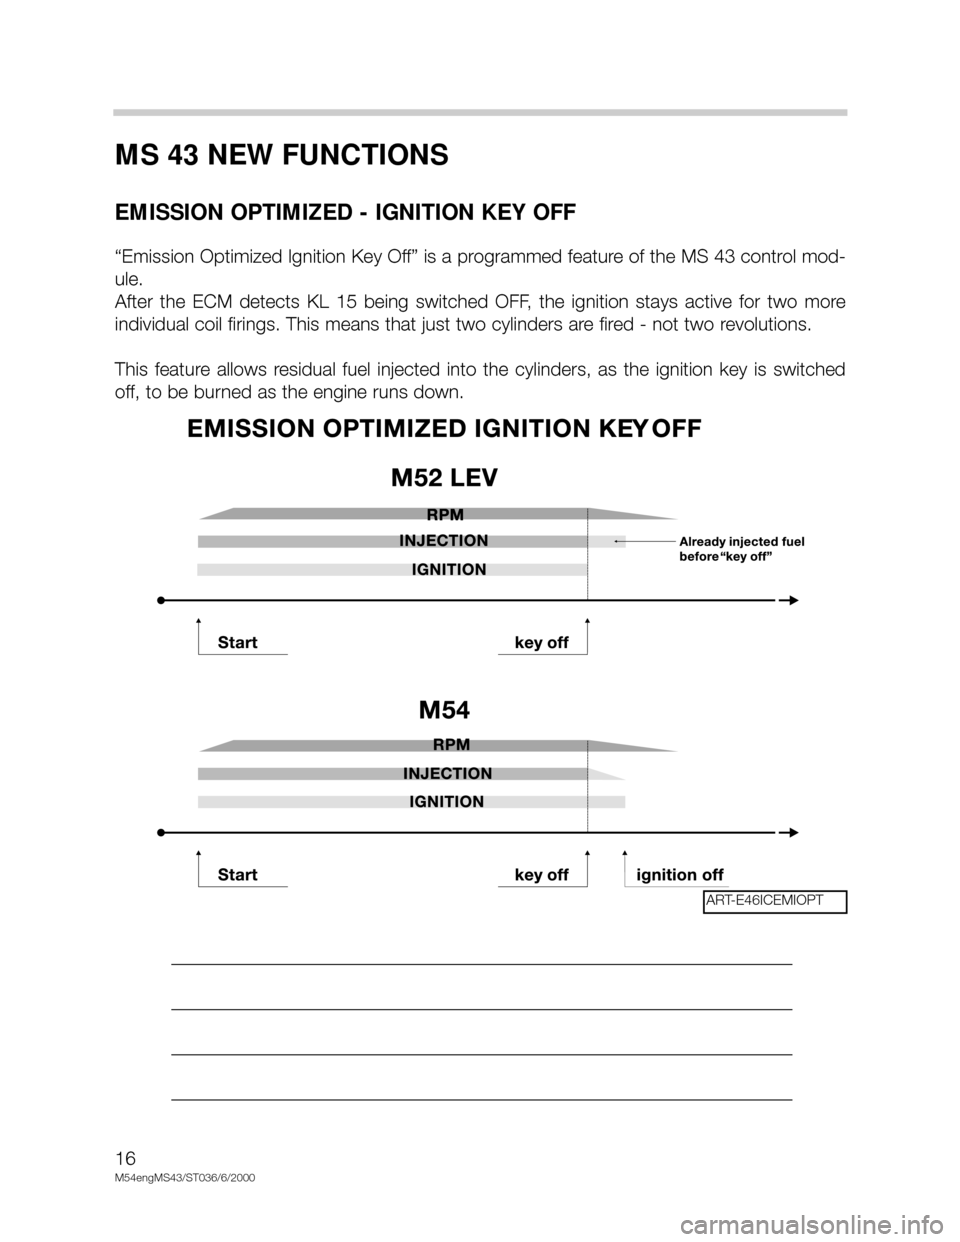 BMW X5 2002 E53 M54 Engine User Guide 16
M54engMS43/ST036/6/2000
MS 43 NEW FUNCTIONS
EMISSION OPTIMIZED - IGNITION KEY OFF
“Emission Optimized Ignition Key Off” is a programmed feature of the MS 43 control mod-
ule. 
After  the  ECM  